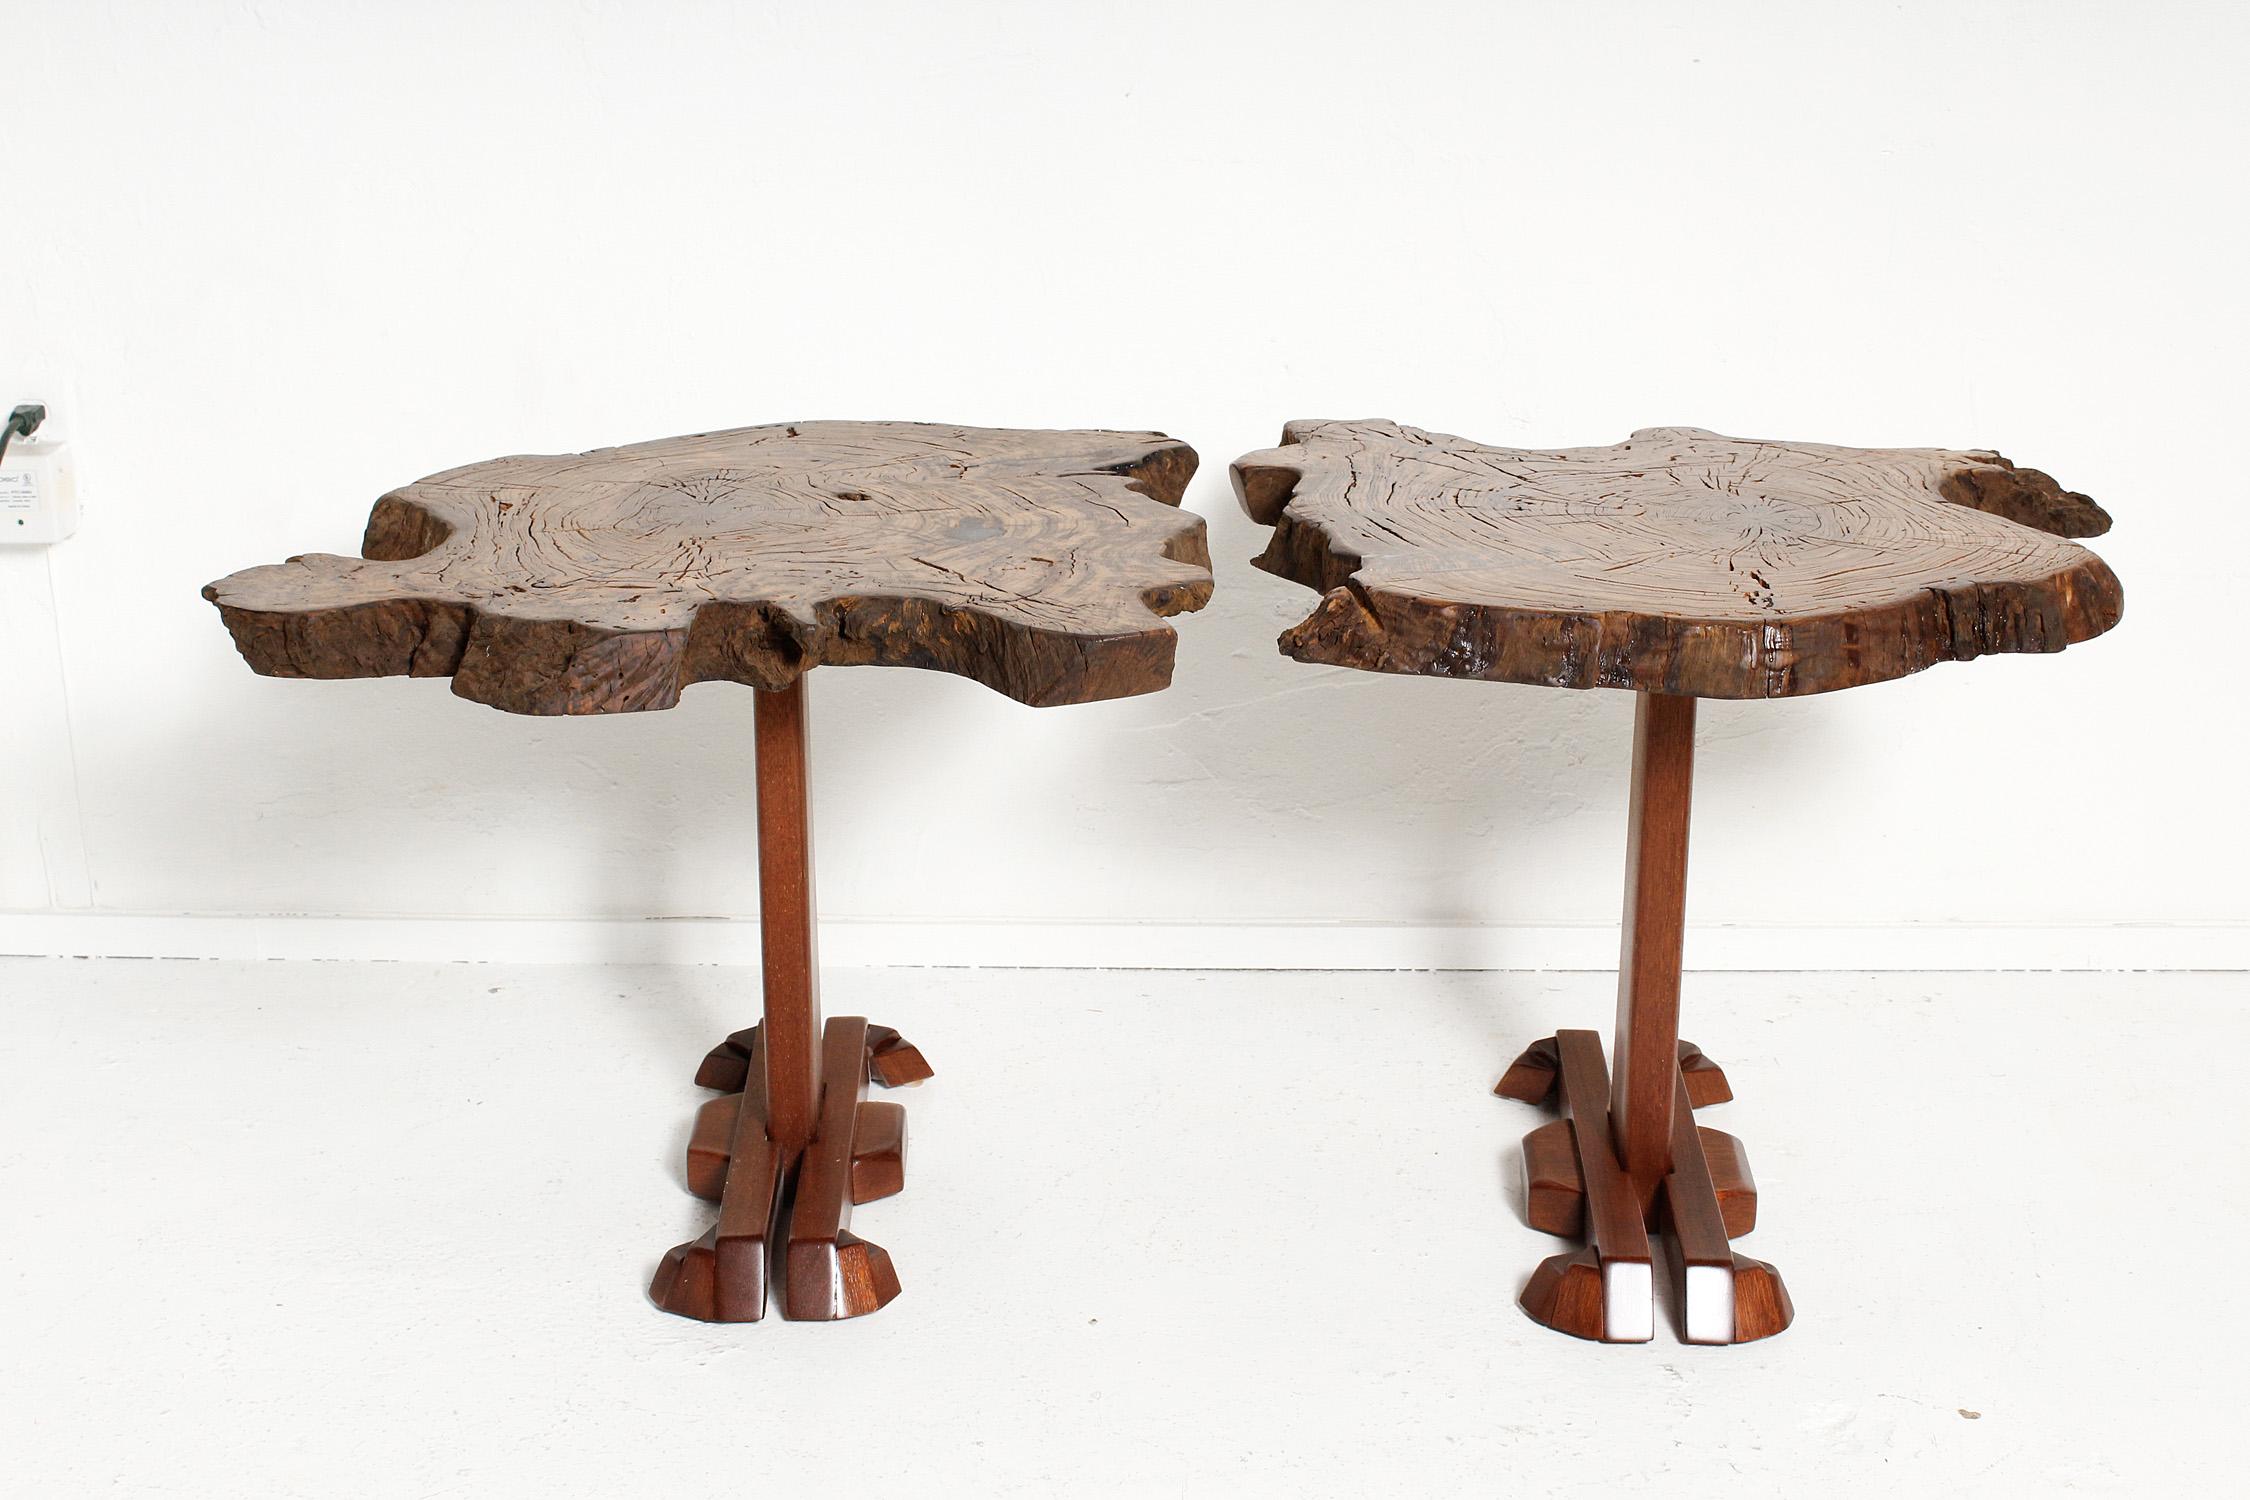 American studio furniture side table has a free edge top in matte finished walnut with resin fillers, mounted on a handmade Arts & Crafts Movement-inspired base. Rustic and charming. Remaining single table is shown on the right in cover photo.